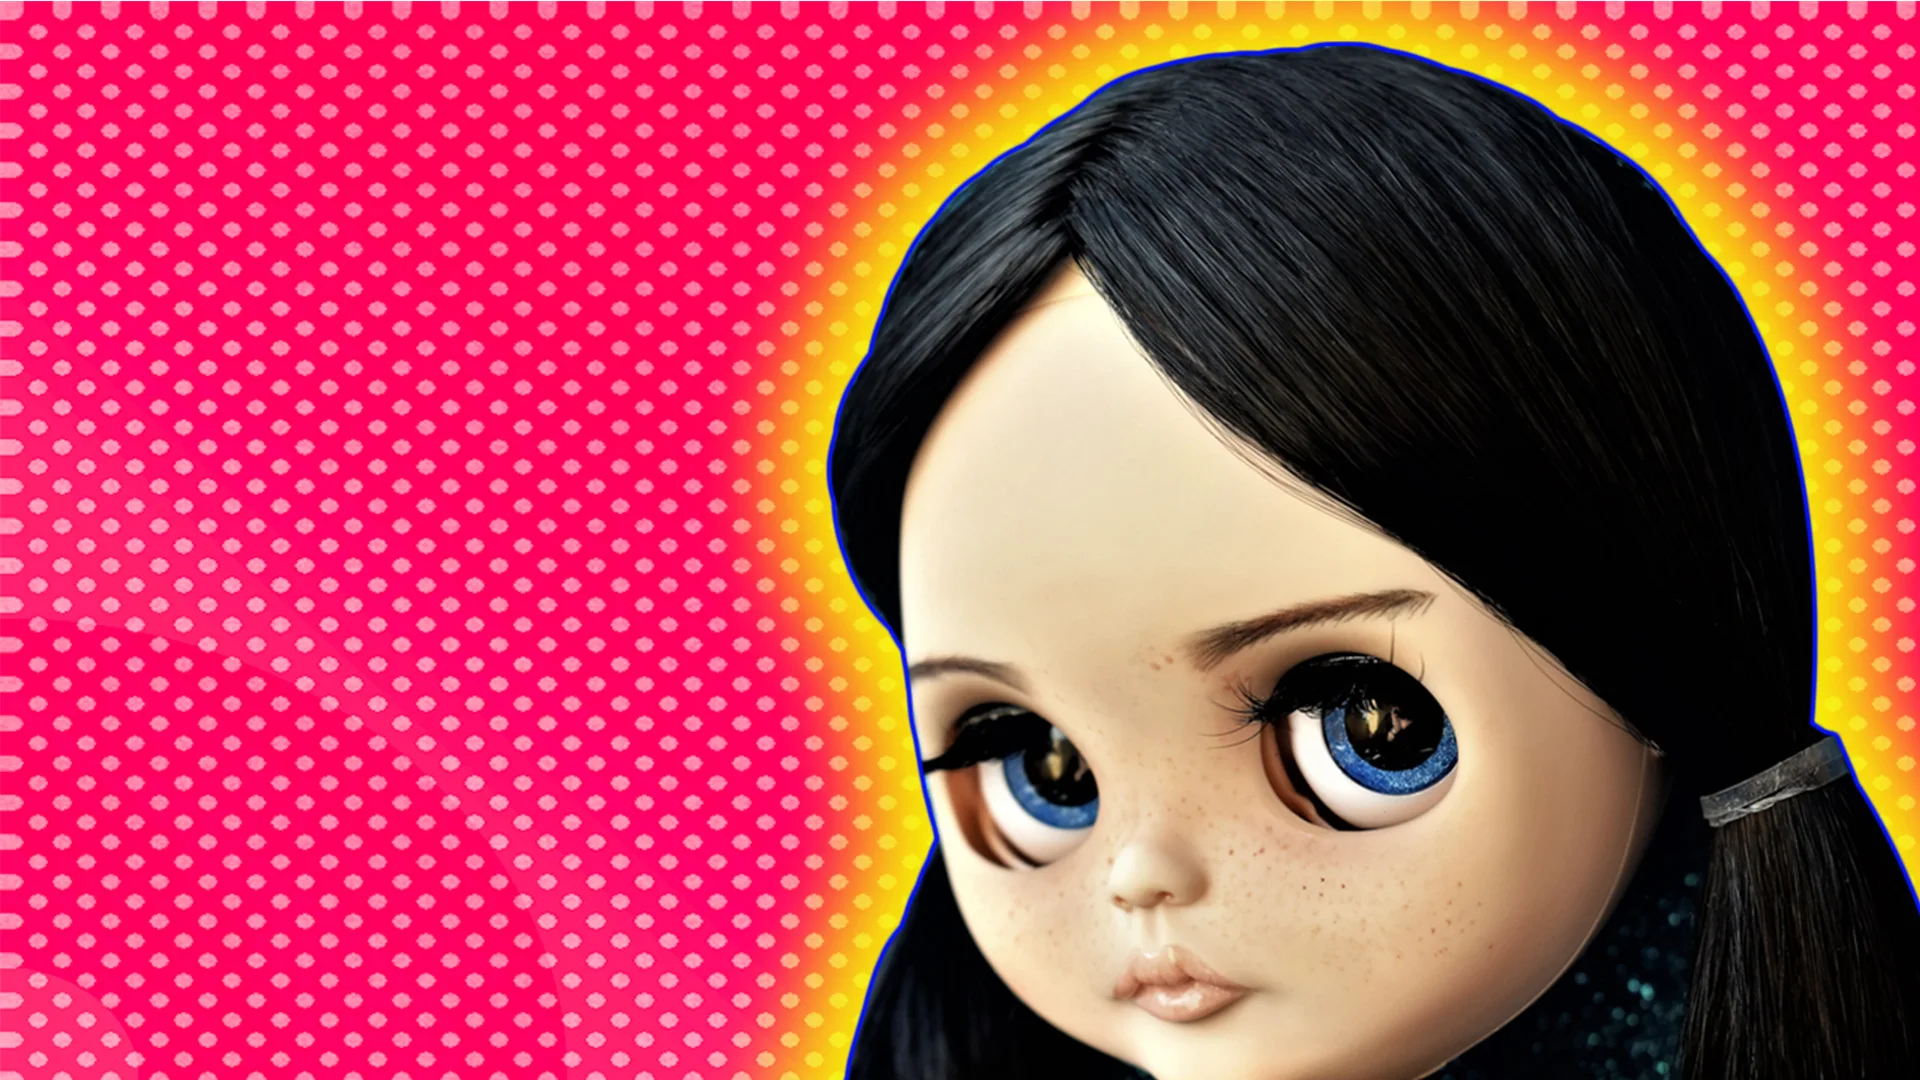 Wednesday Adams Blythe Doll - in graphic house style